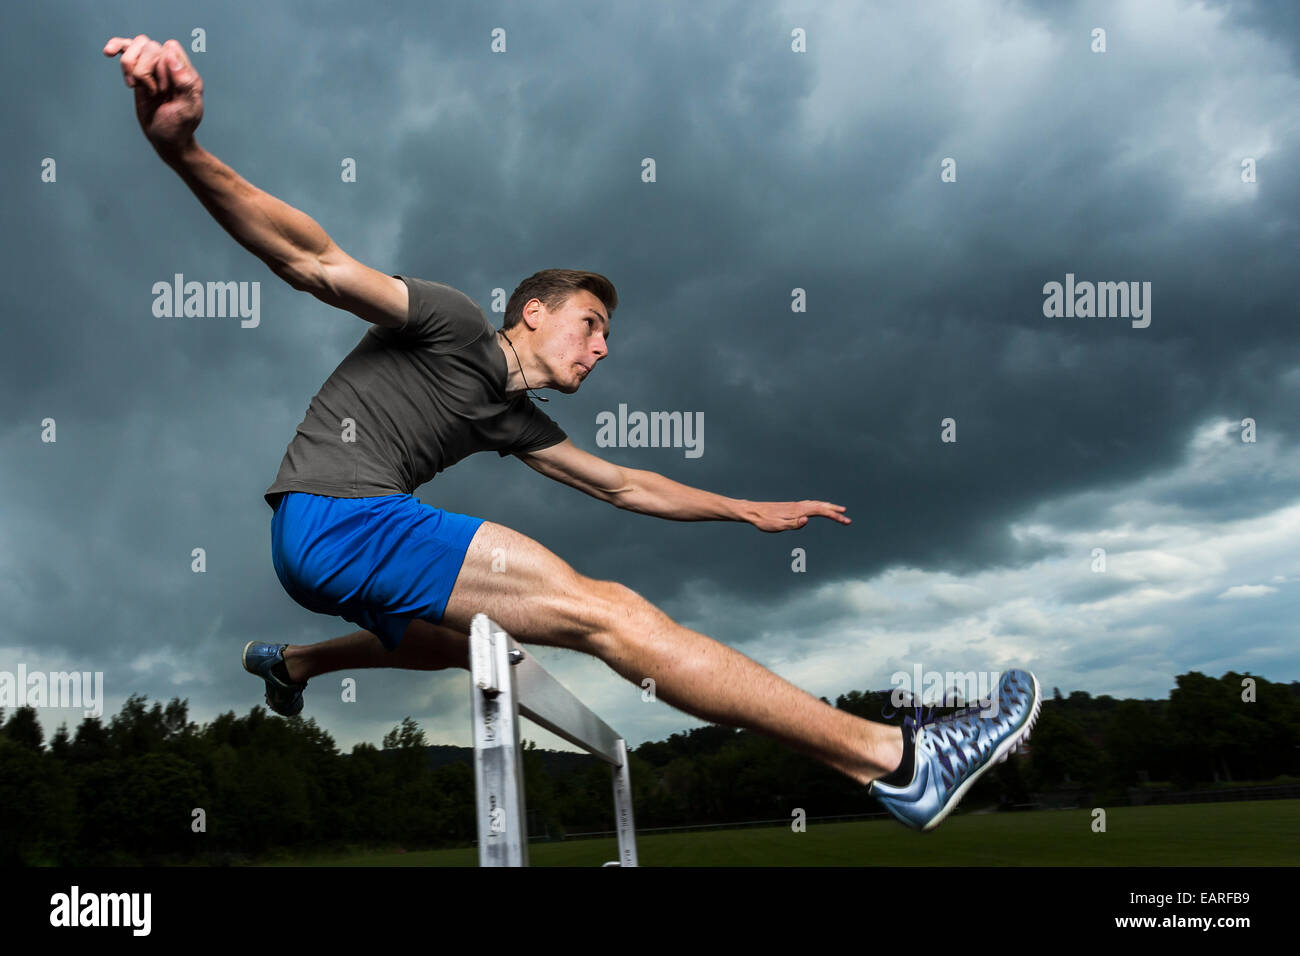 Athlete, 19 years, jumping hurdles, Winterbach, Baden-Württemberg, Germany Stock Photo